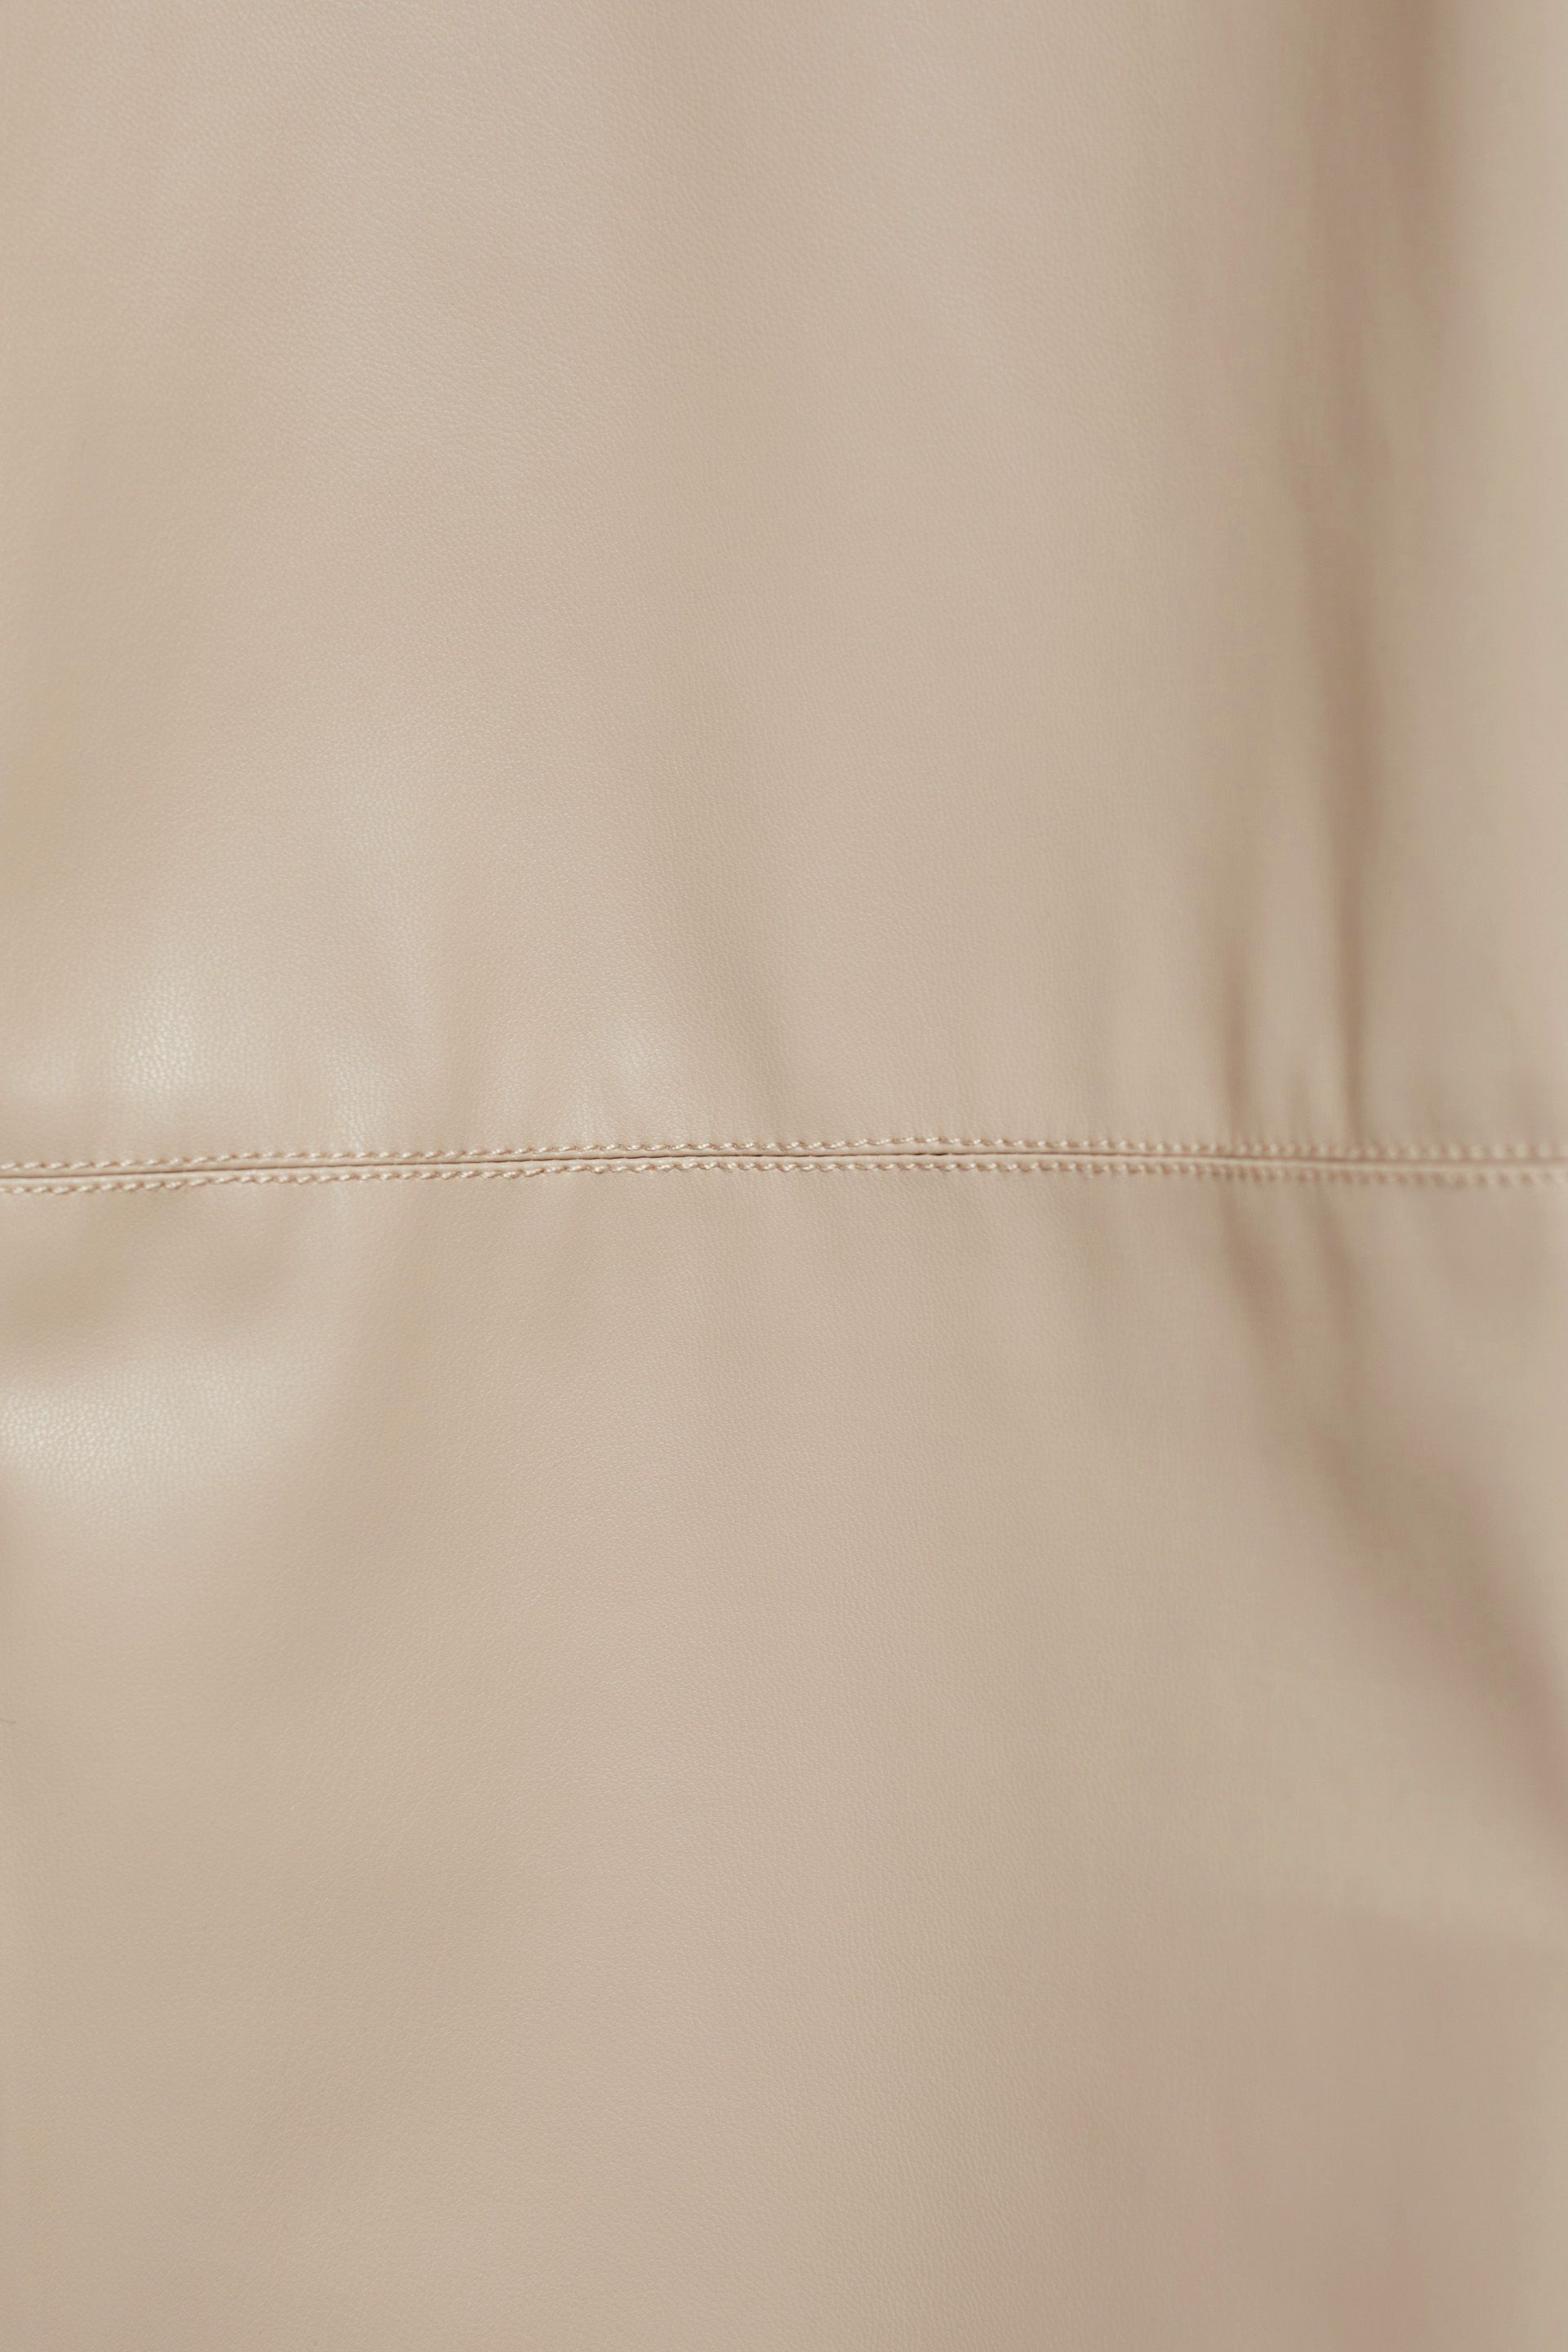 Pantaloni cropped in similpelle, Beige chiaro, large image number 3